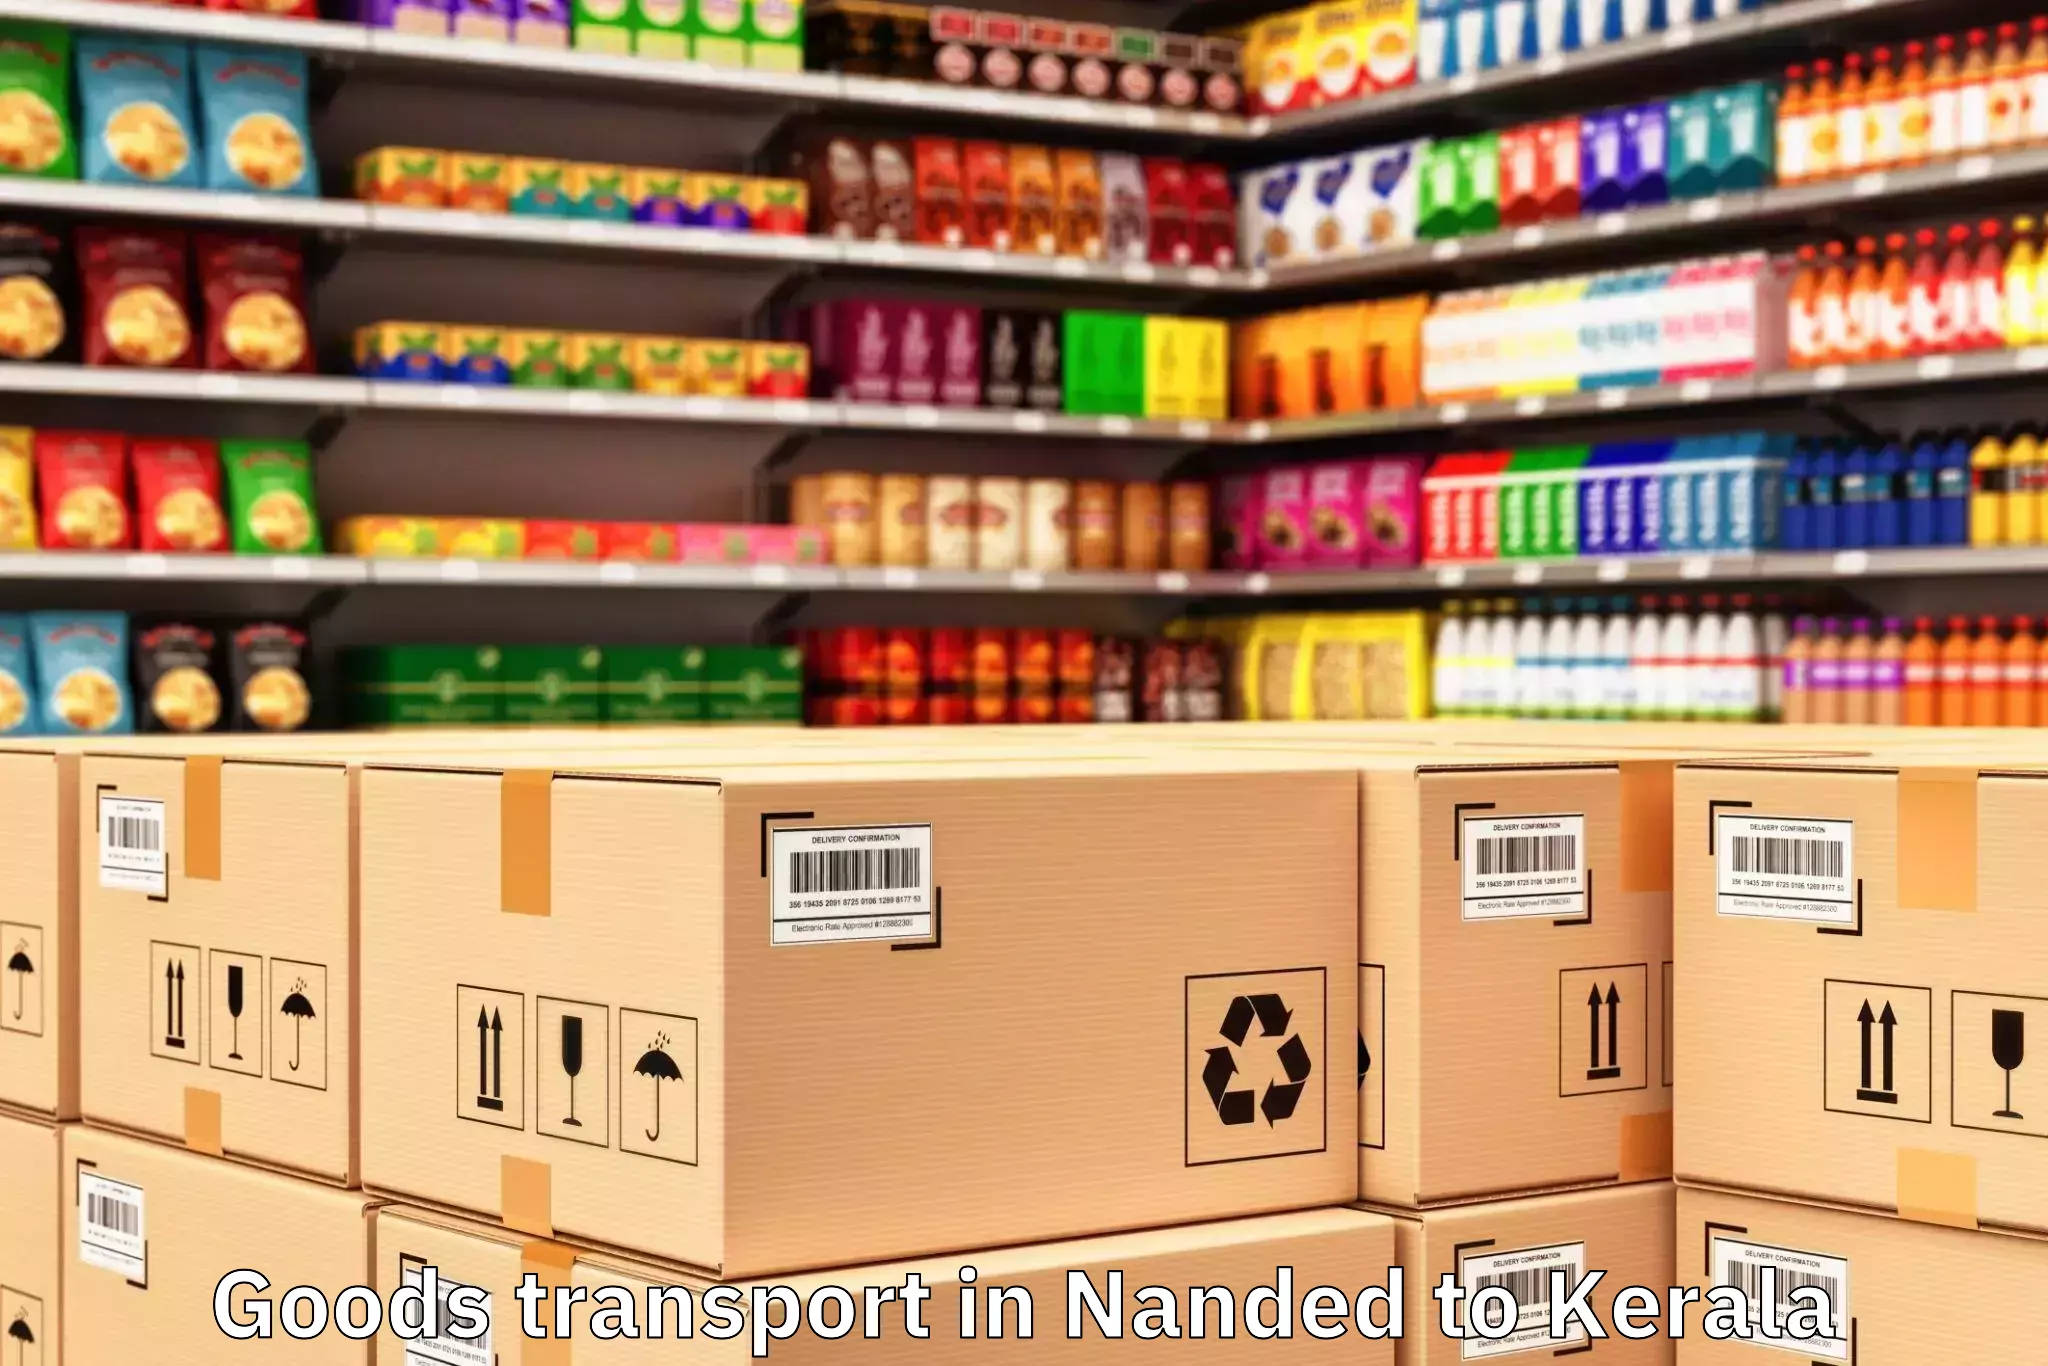 Trusted Nanded to Kerala University Of Fisheries And Ocean Studies Kochi Goods Transport